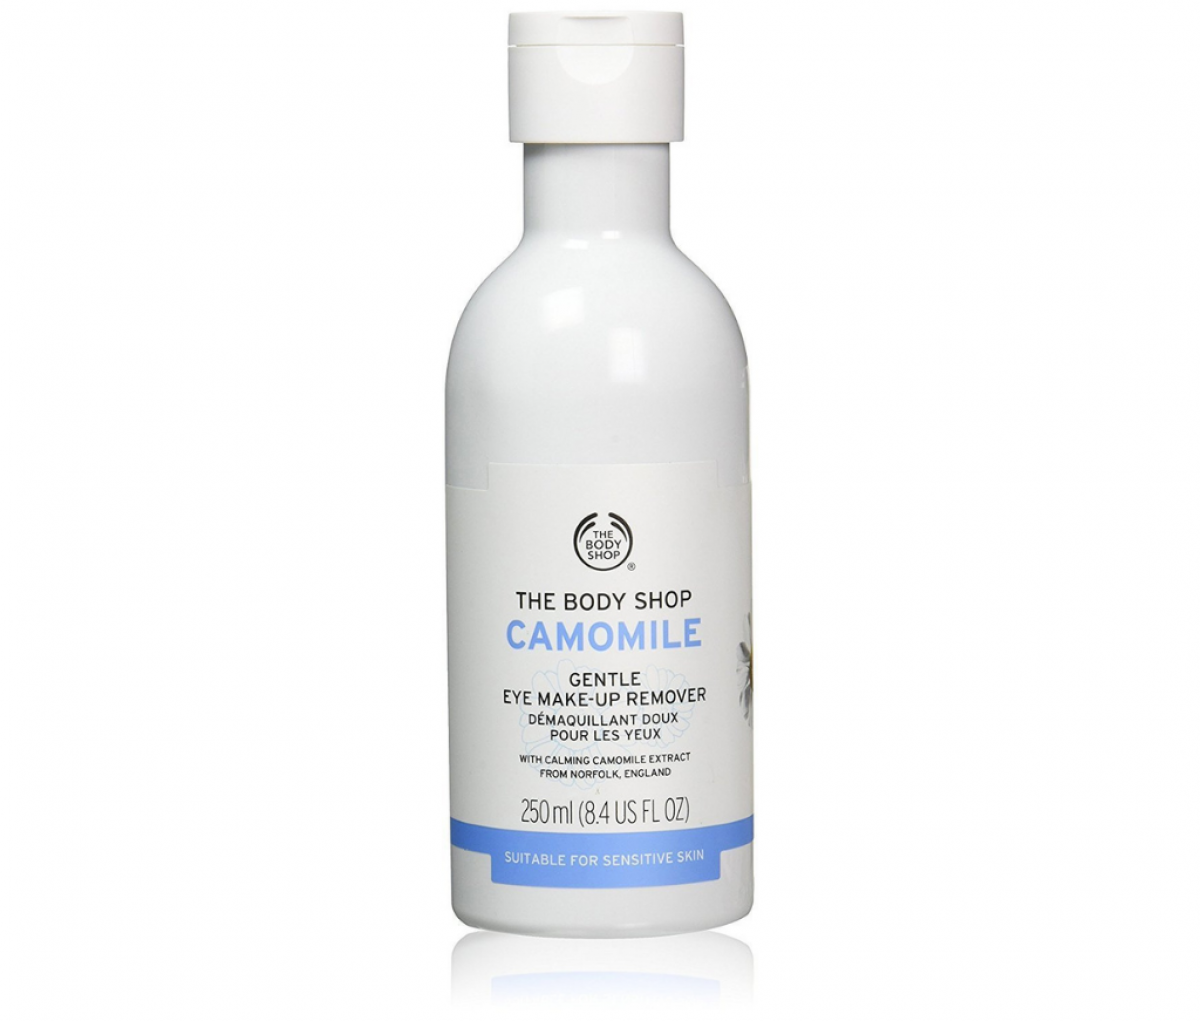 The Body Shop Camomile Gentle Eye Makeup Remover 250ml